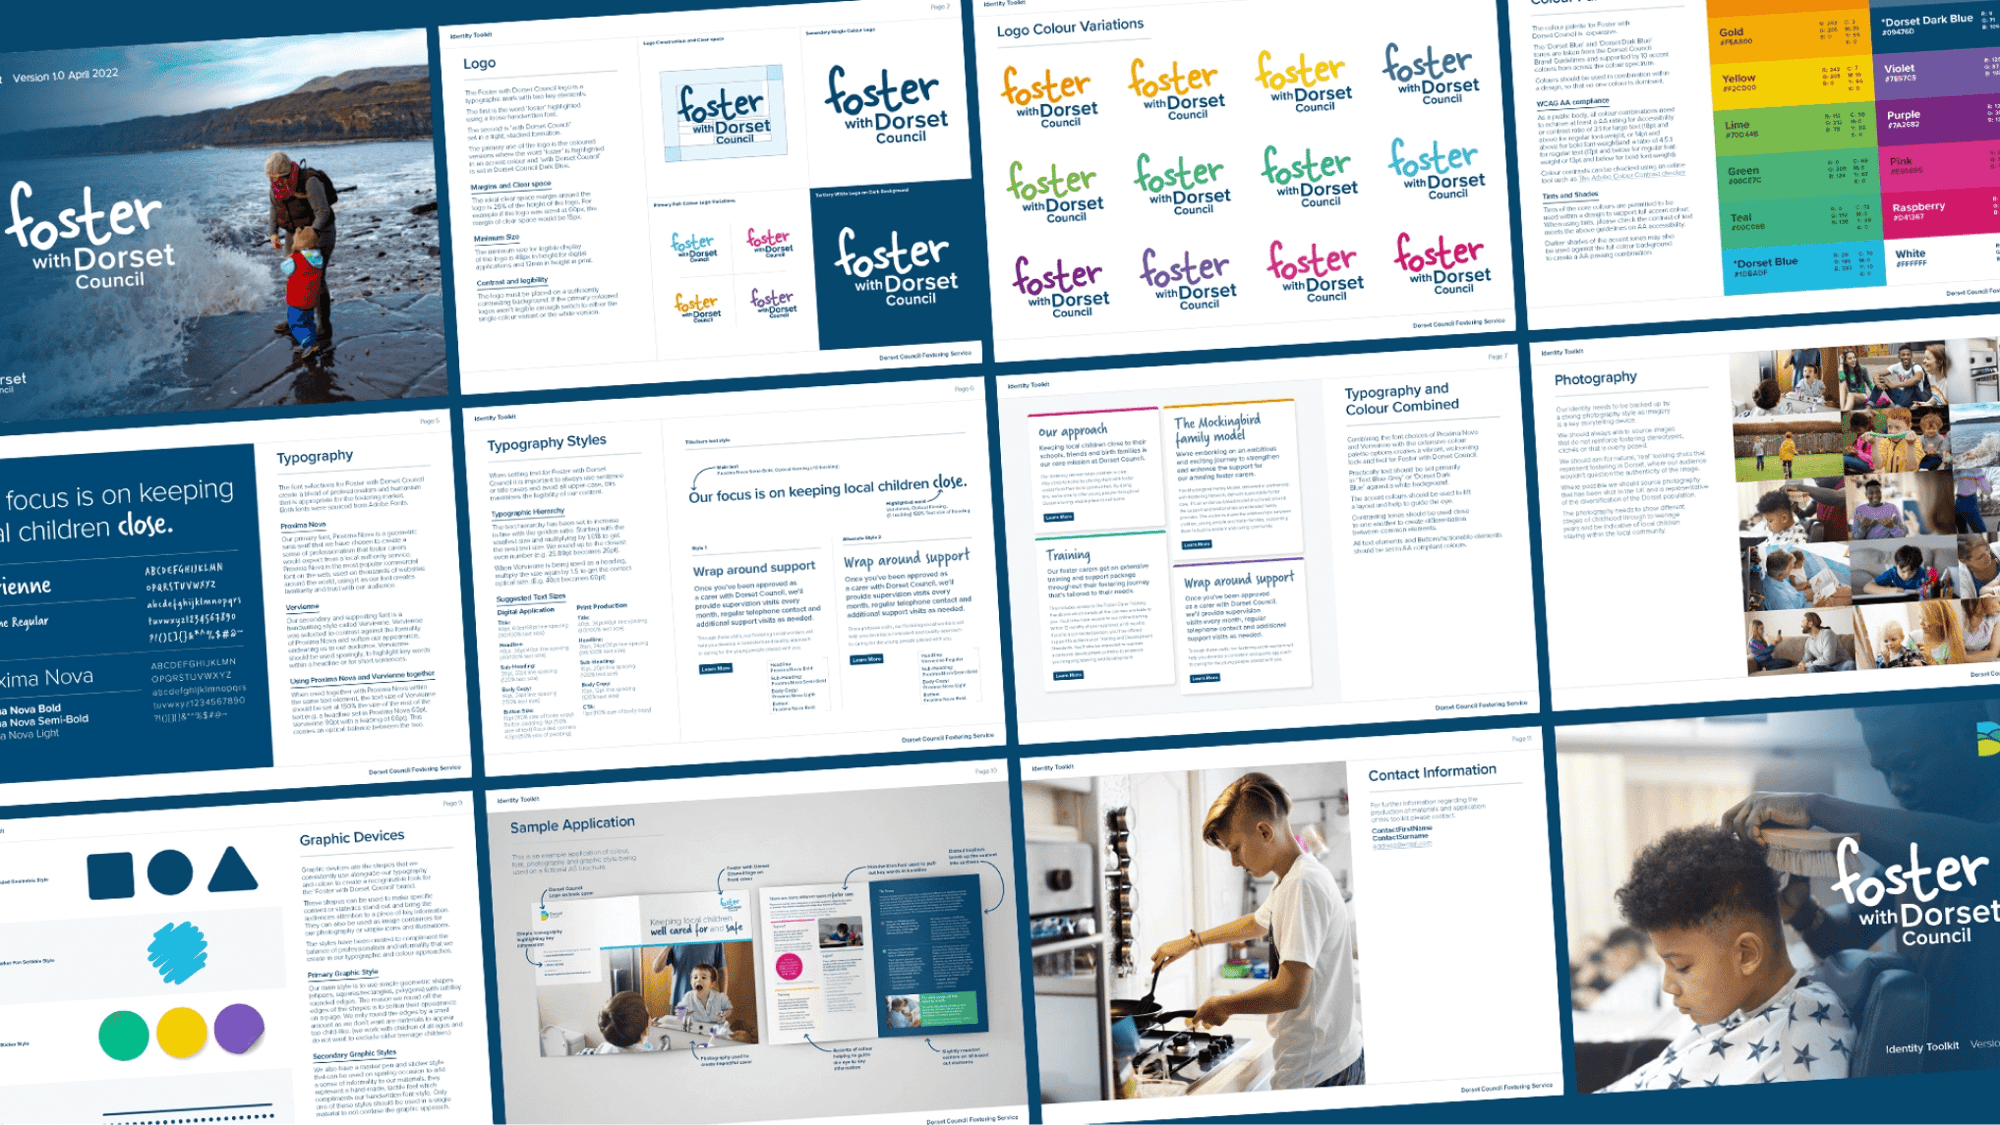 A mock up of the brand guidelines.